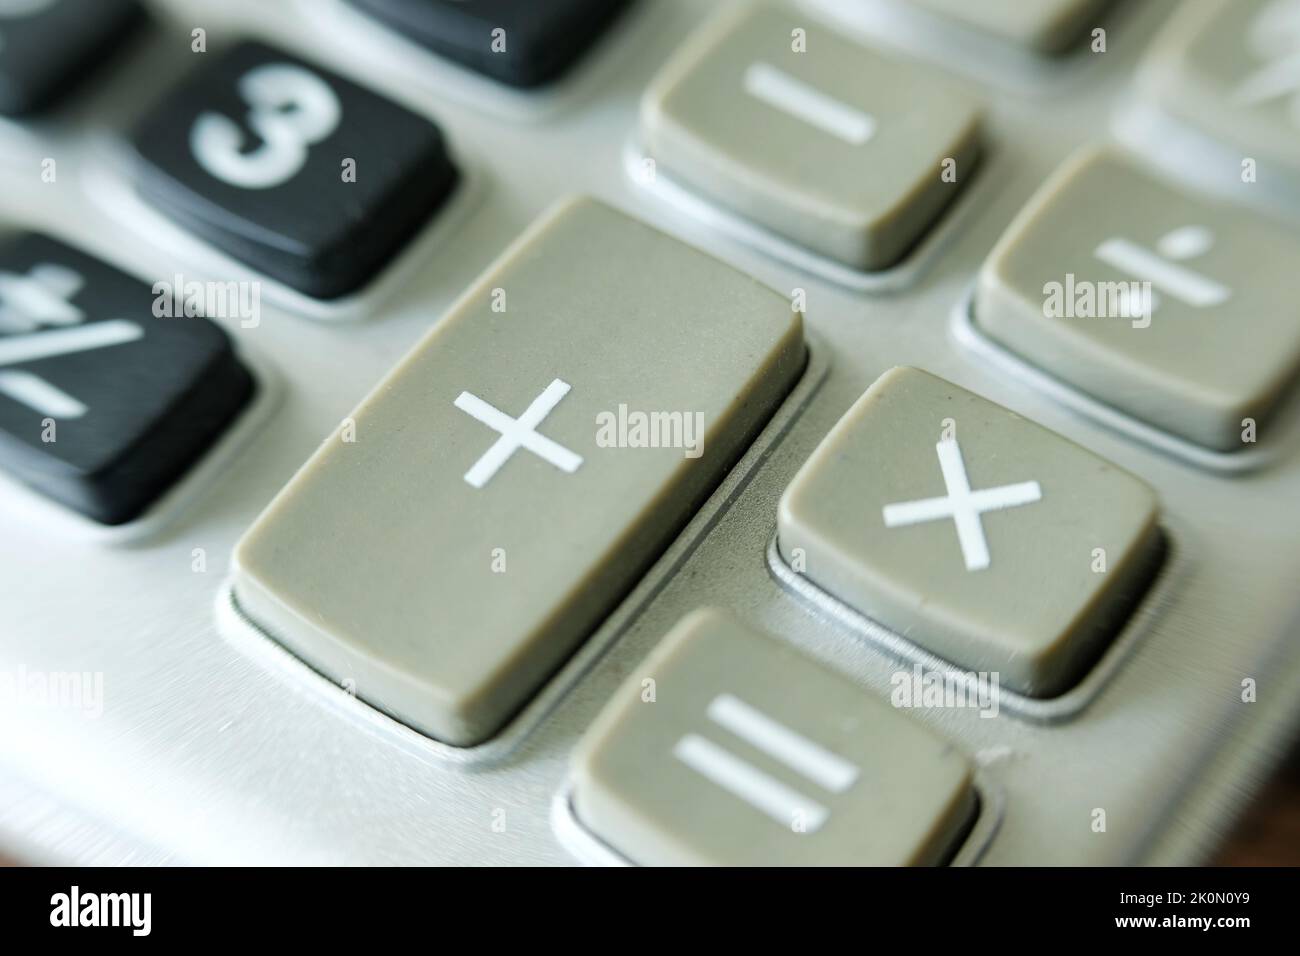 plus, minus, mutiply equal buttons on calculator pad Stock Photo